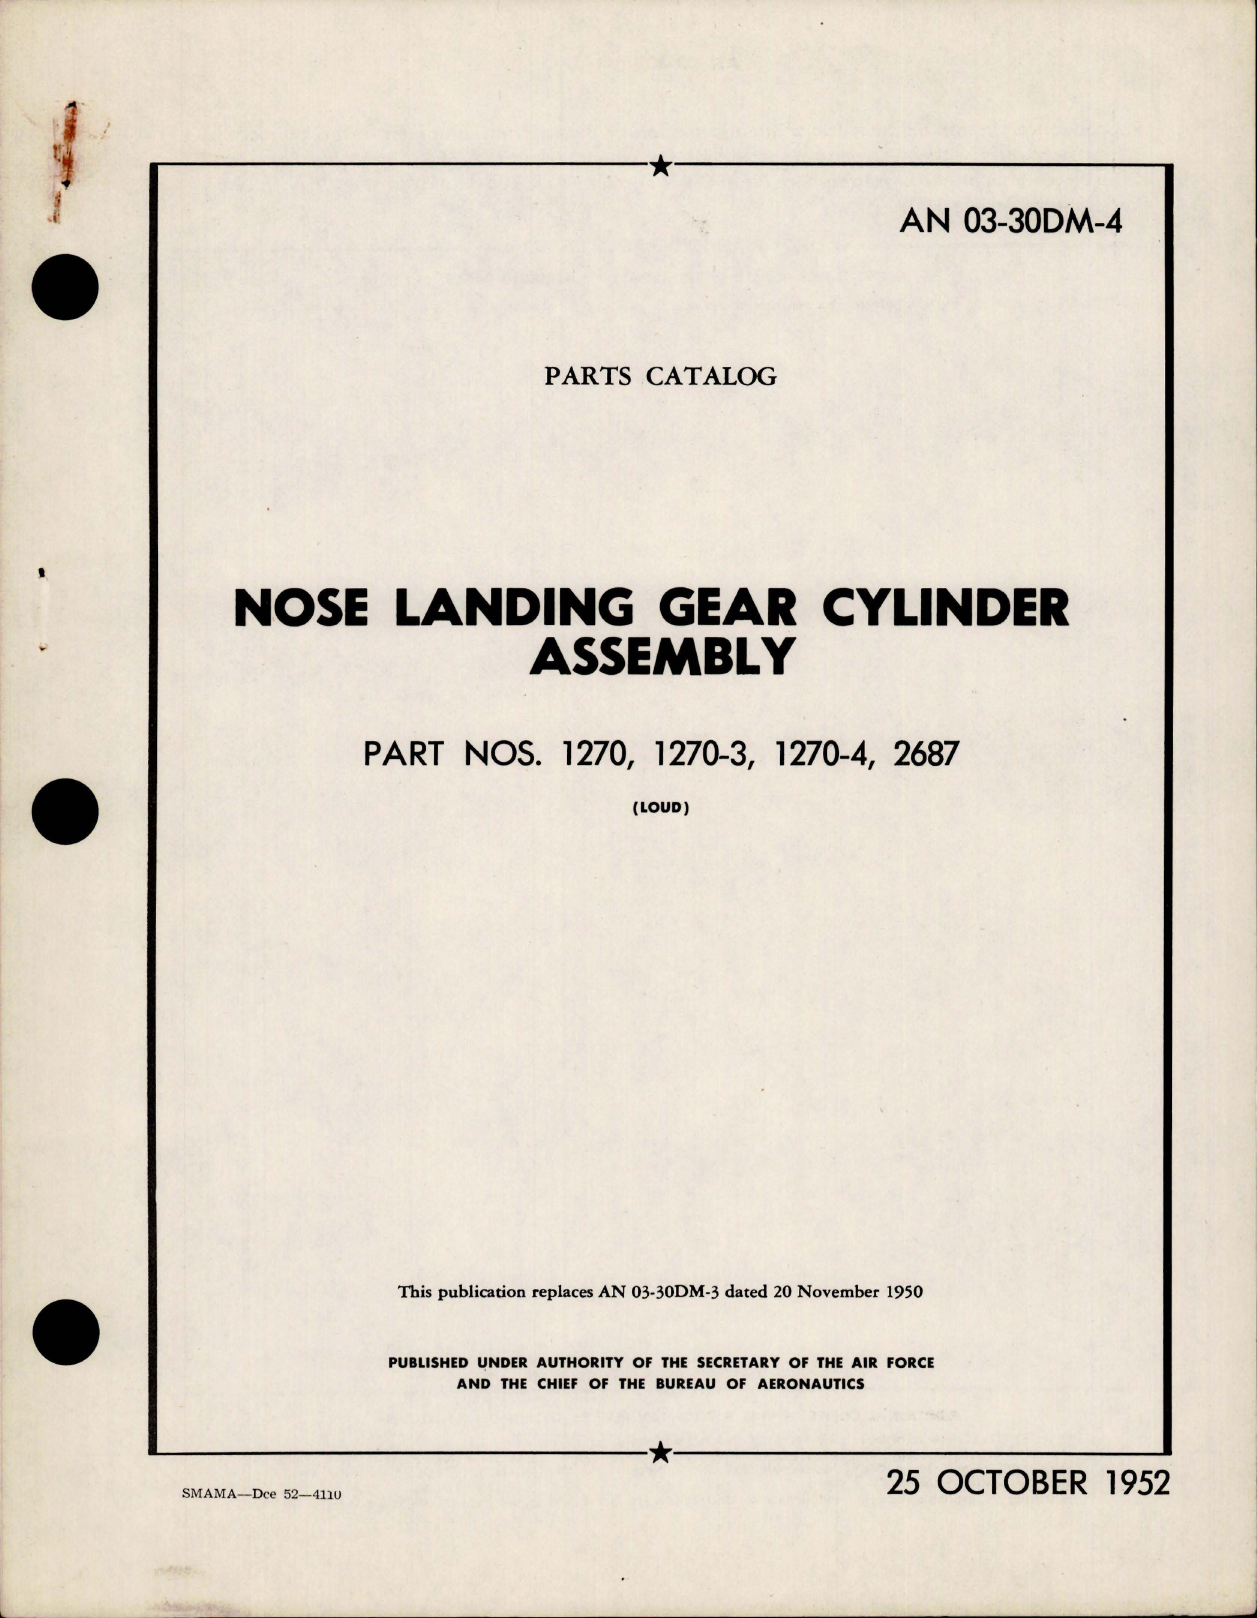 Sample page 1 from AirCorps Library document: Parts Catalog for Nose Landing Gear Cylinder Assembly - Parts 1270, 1270-3, 1270-4, 2687